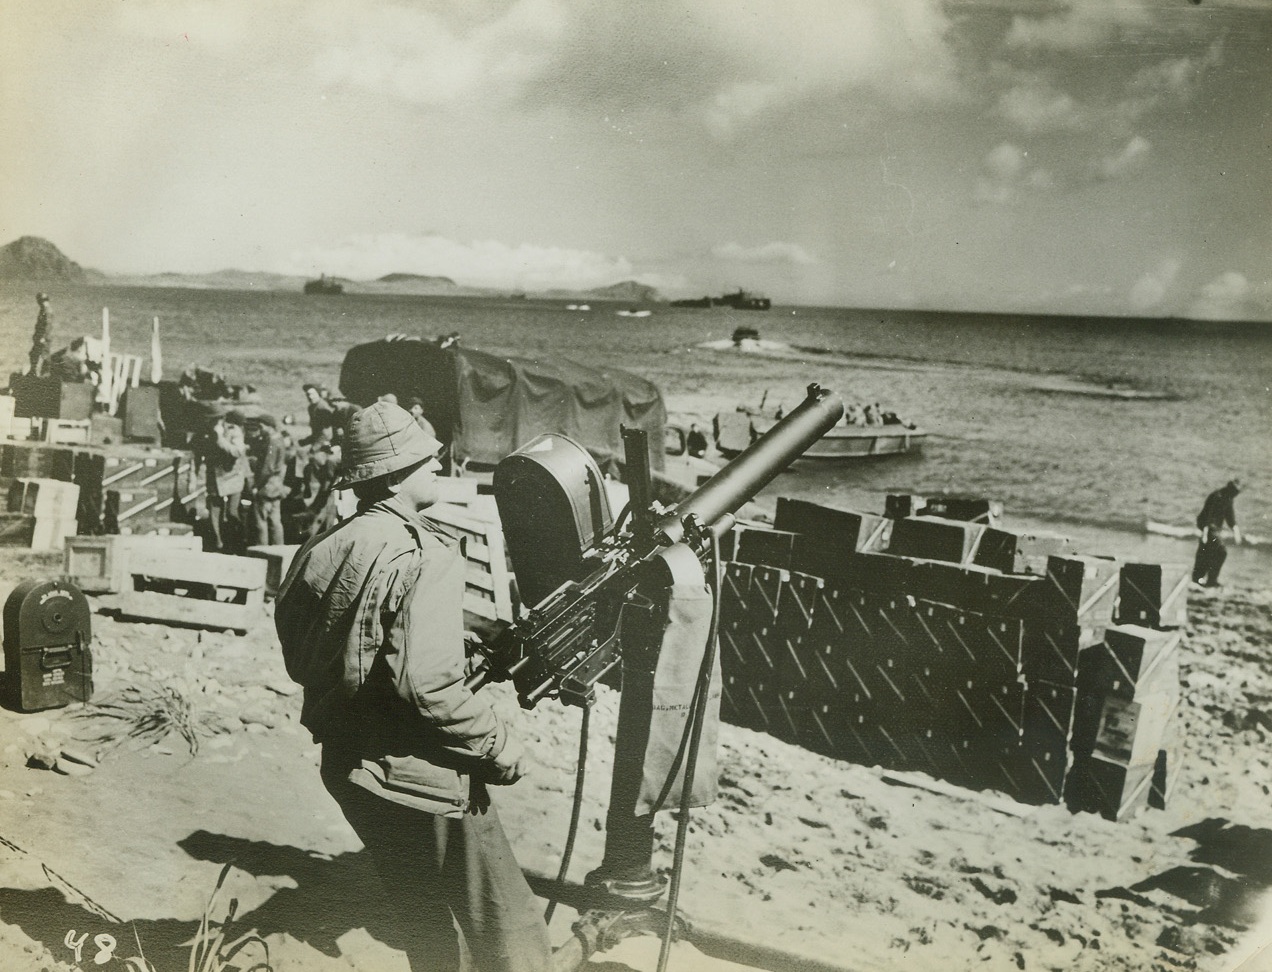 American Troops Land in the Aleutian Islands, 10/3/1942. Washington, D.C.—United States Army troops with Navy support have occupied the Andreanof Island group in the Aleutians, only 125 miles east of the Jap held Kiska it was announced by the Navy. Photo shows: a 50-caliber machine gun keeps a section of the beach well-guarded. The ammunition boxes in the background were removed shortly after this photo was taken.Credit: U.S. Signal Corps photo from ACME.;